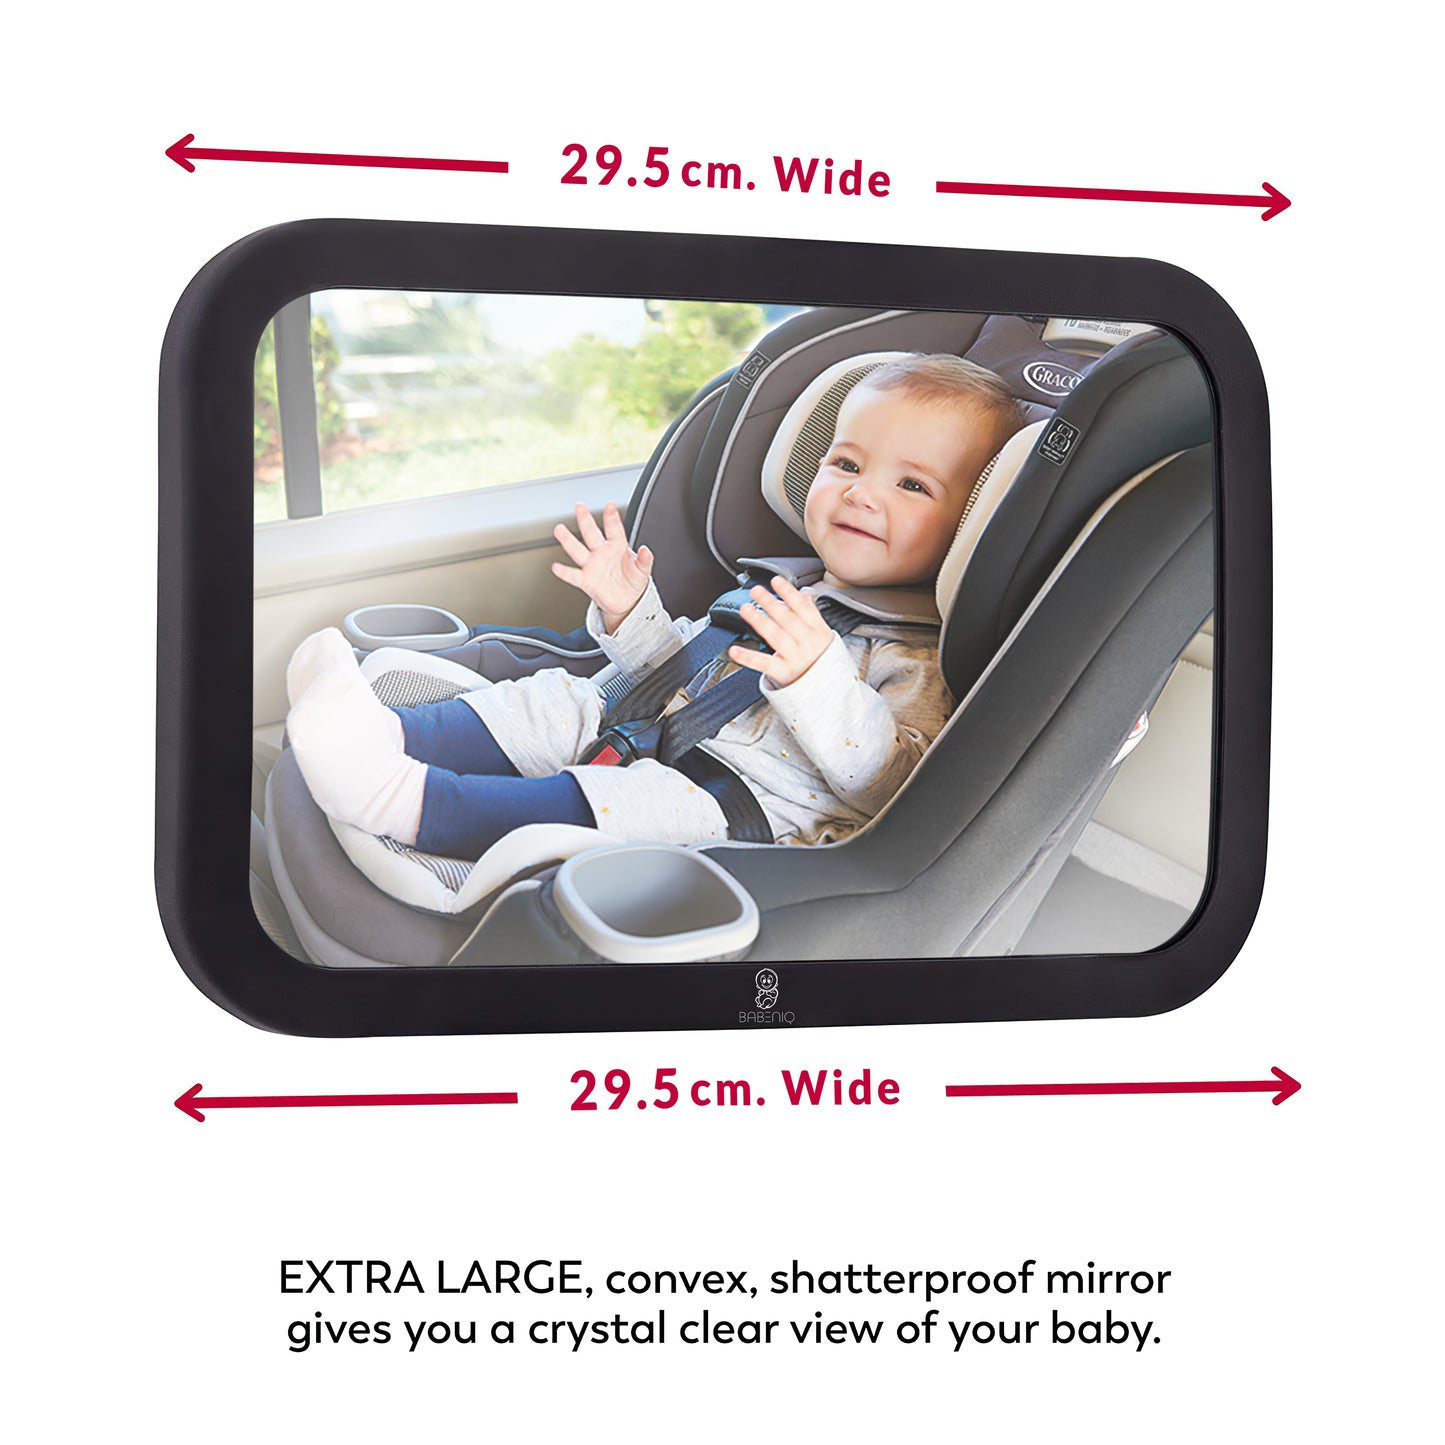 Babeniq Baby Car Mirror, Extra Large, Shatterproof, Crystal Clear View